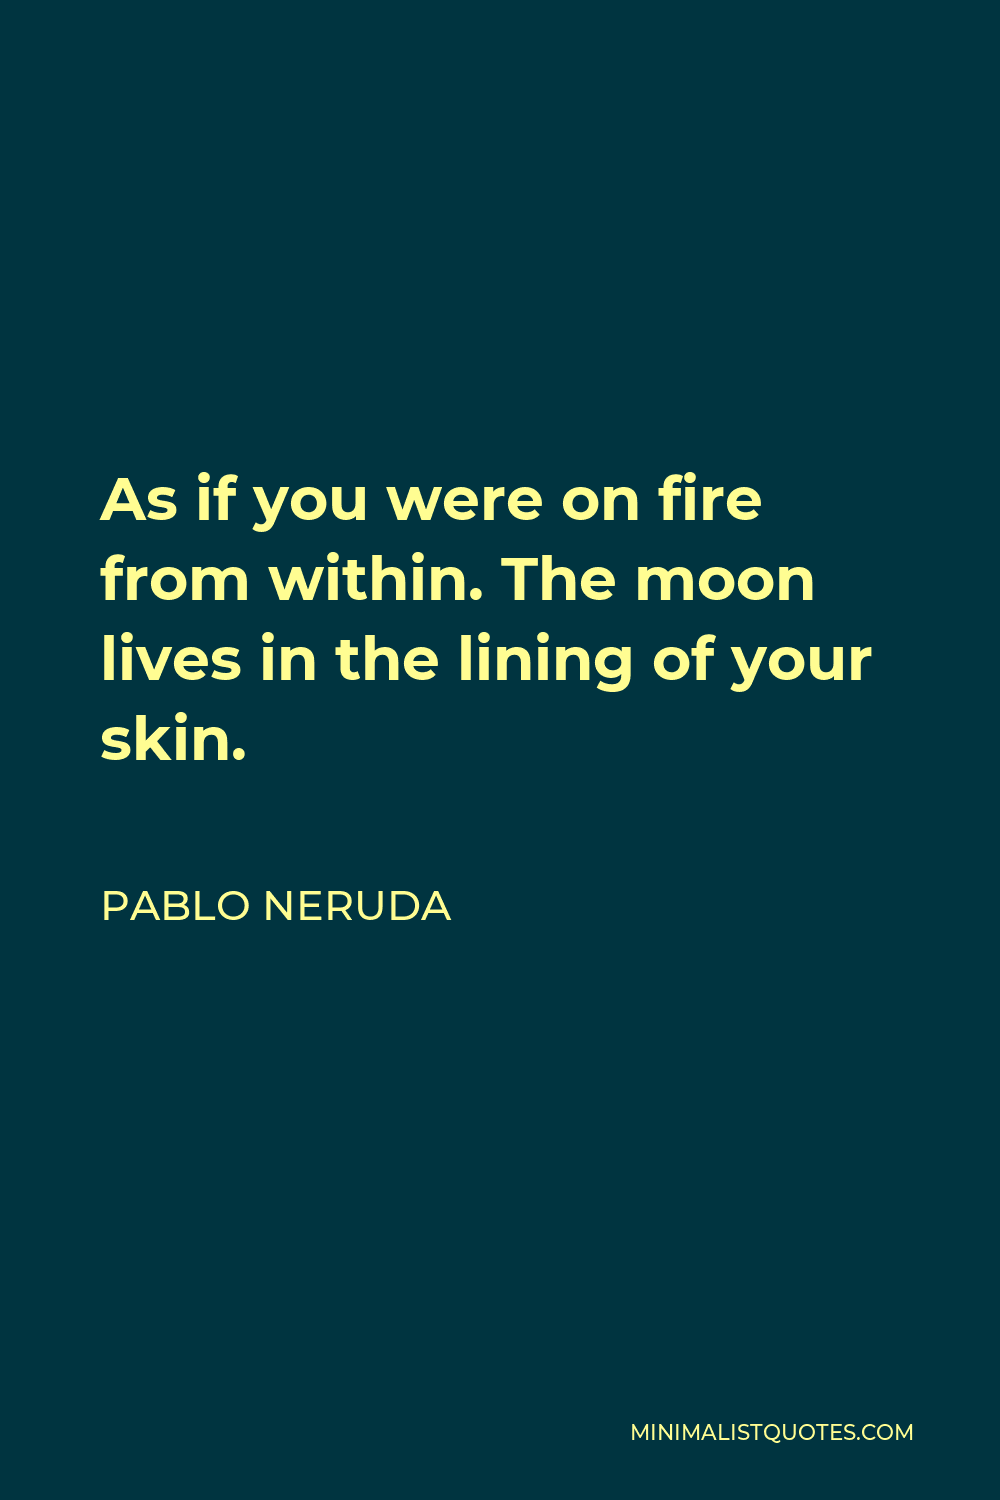 Pablo Neruda Quote - As if you were on fire from within. The moon lives in the lining of your skin.